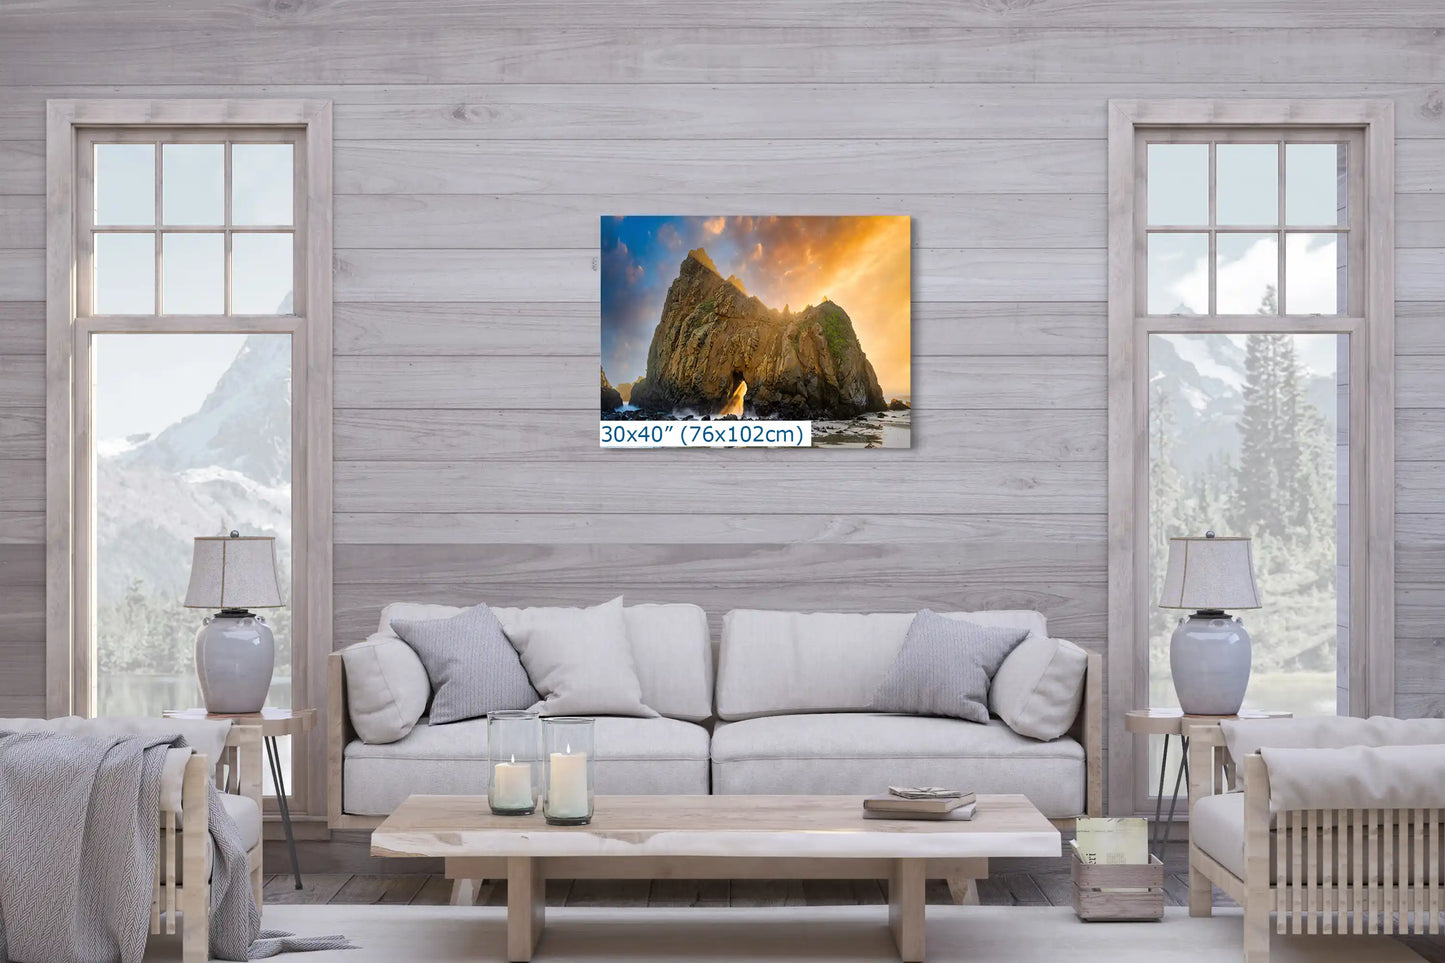 A large 30"x40" canvas print in a living room, featuring the Keyhole Arch with a golden sunset, acting as a bold natural centerpiece.